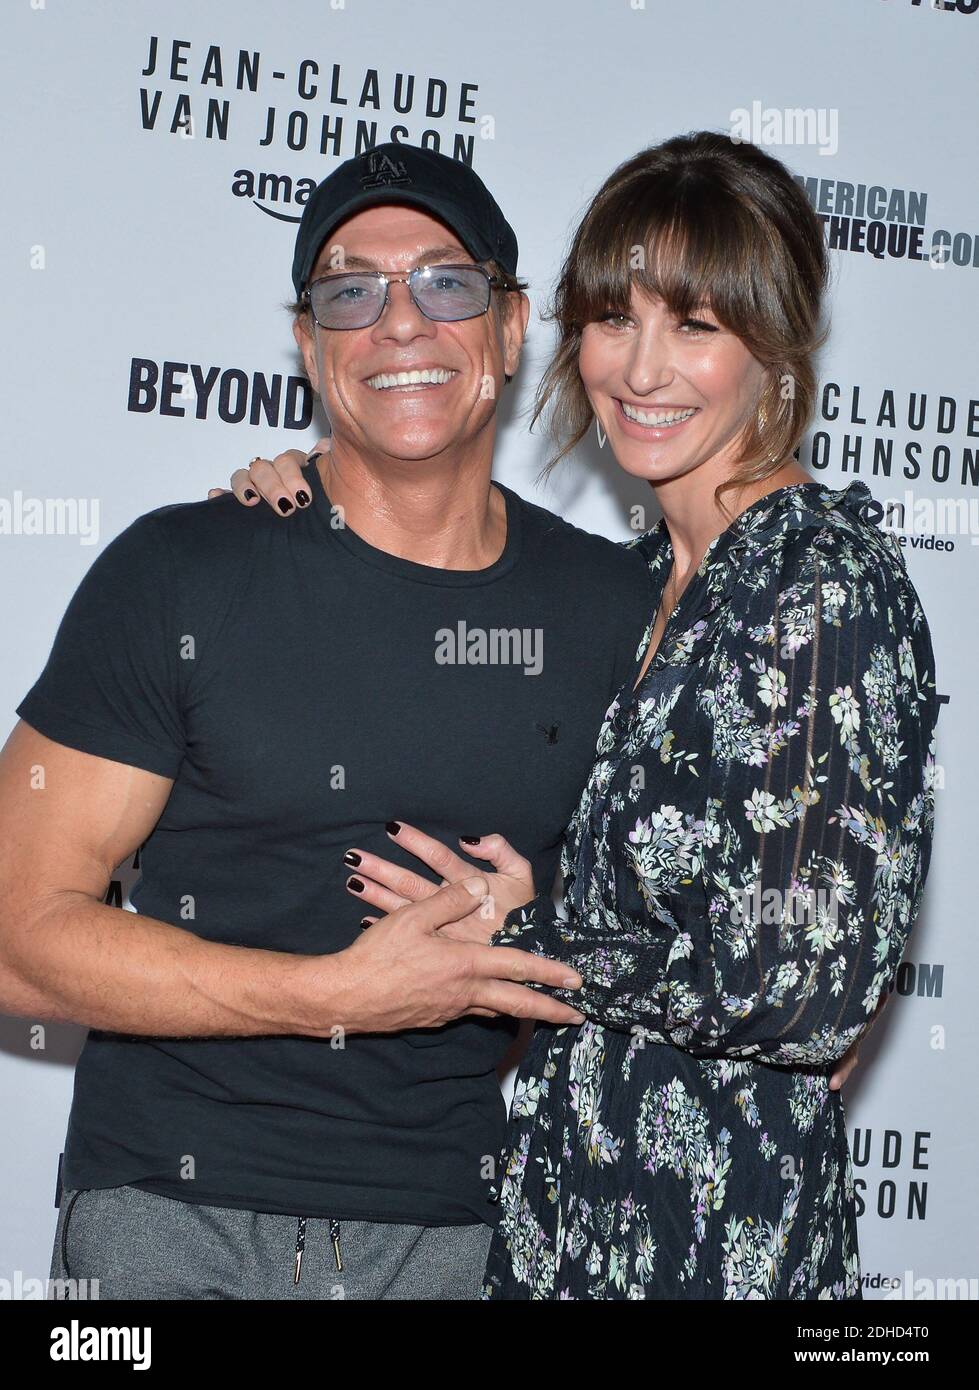 four times Baron Yup Jean-Claude Van Damme and Kat Foster attend the Beyond Fest screening and  Cast/Creator panel of Amazon Prime Video's exclusive series 'Jean-Claude Van  Johnson' at the Egyptian Theatre on October 9, 2017 in